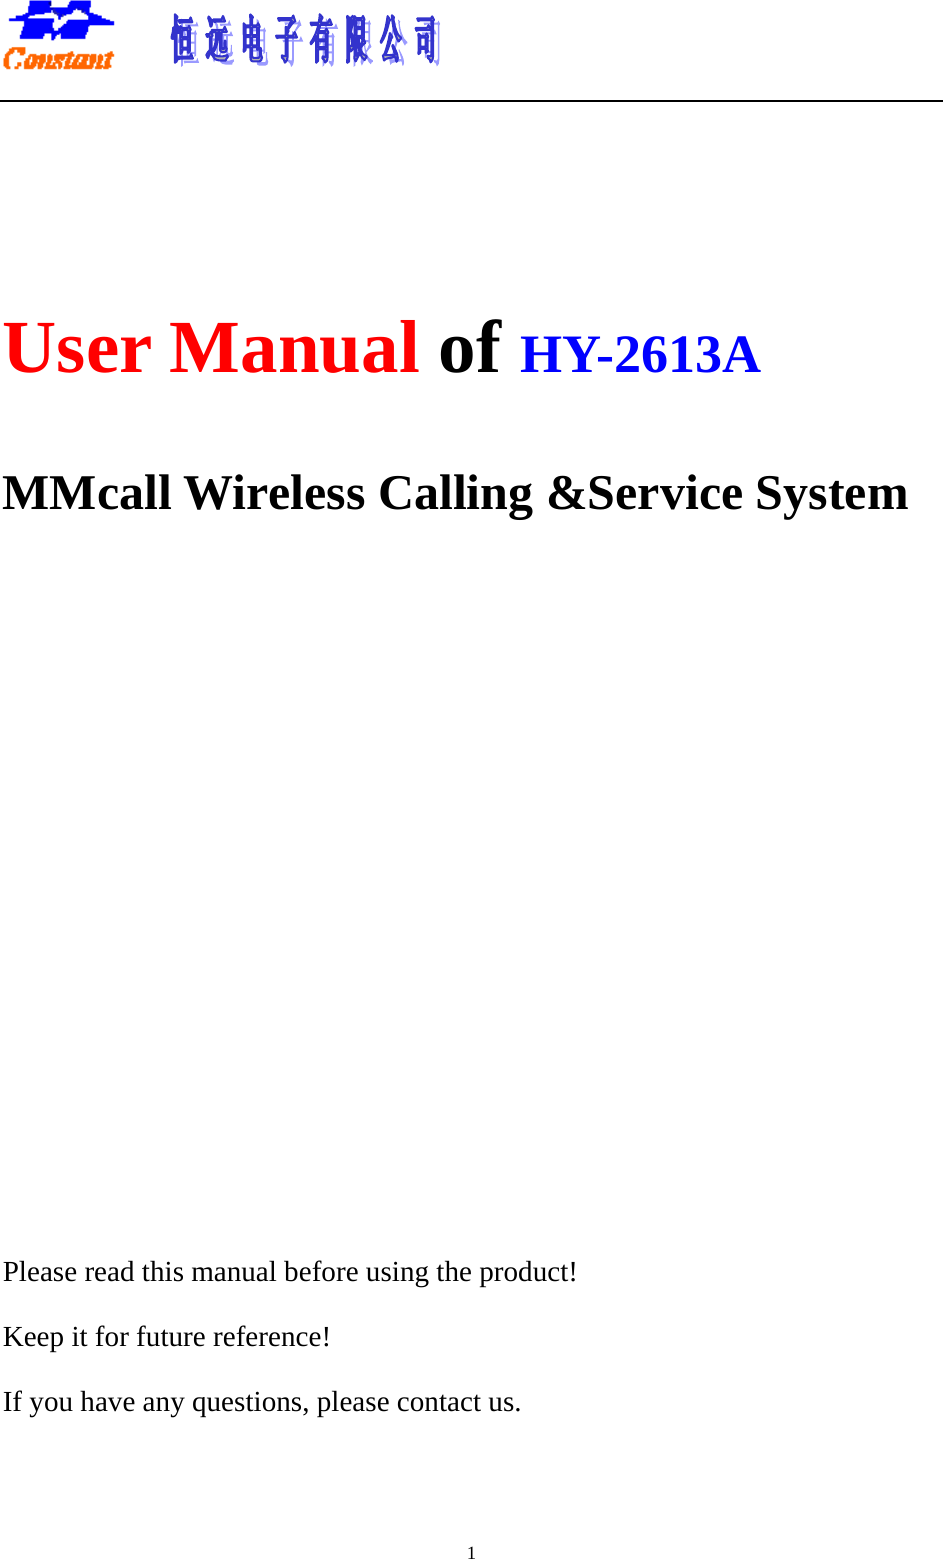       1  User Manual of HY-2613A  MMcall Wireless Calling &amp;Service System            Please read this manual before using the product! Keep it for future reference! If you have any questions, please contact us.  